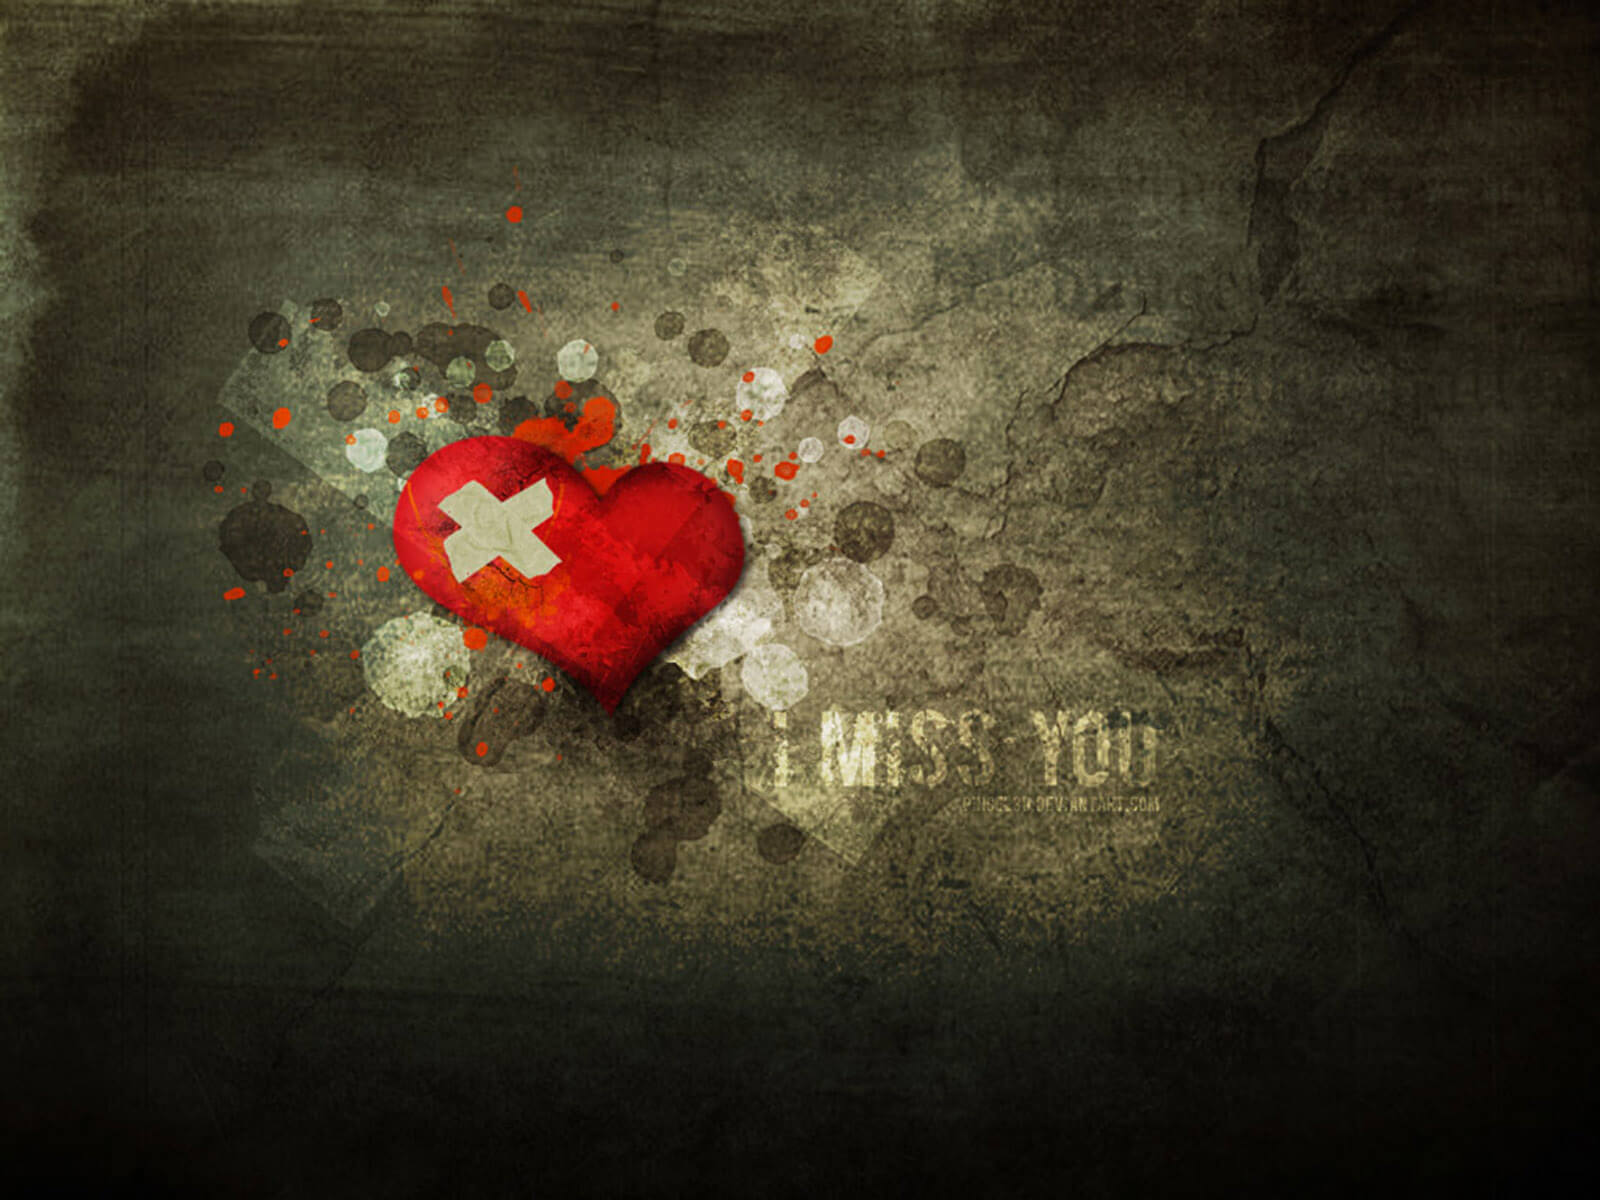 I Miss You Animated Image Gifs And Wallpaper